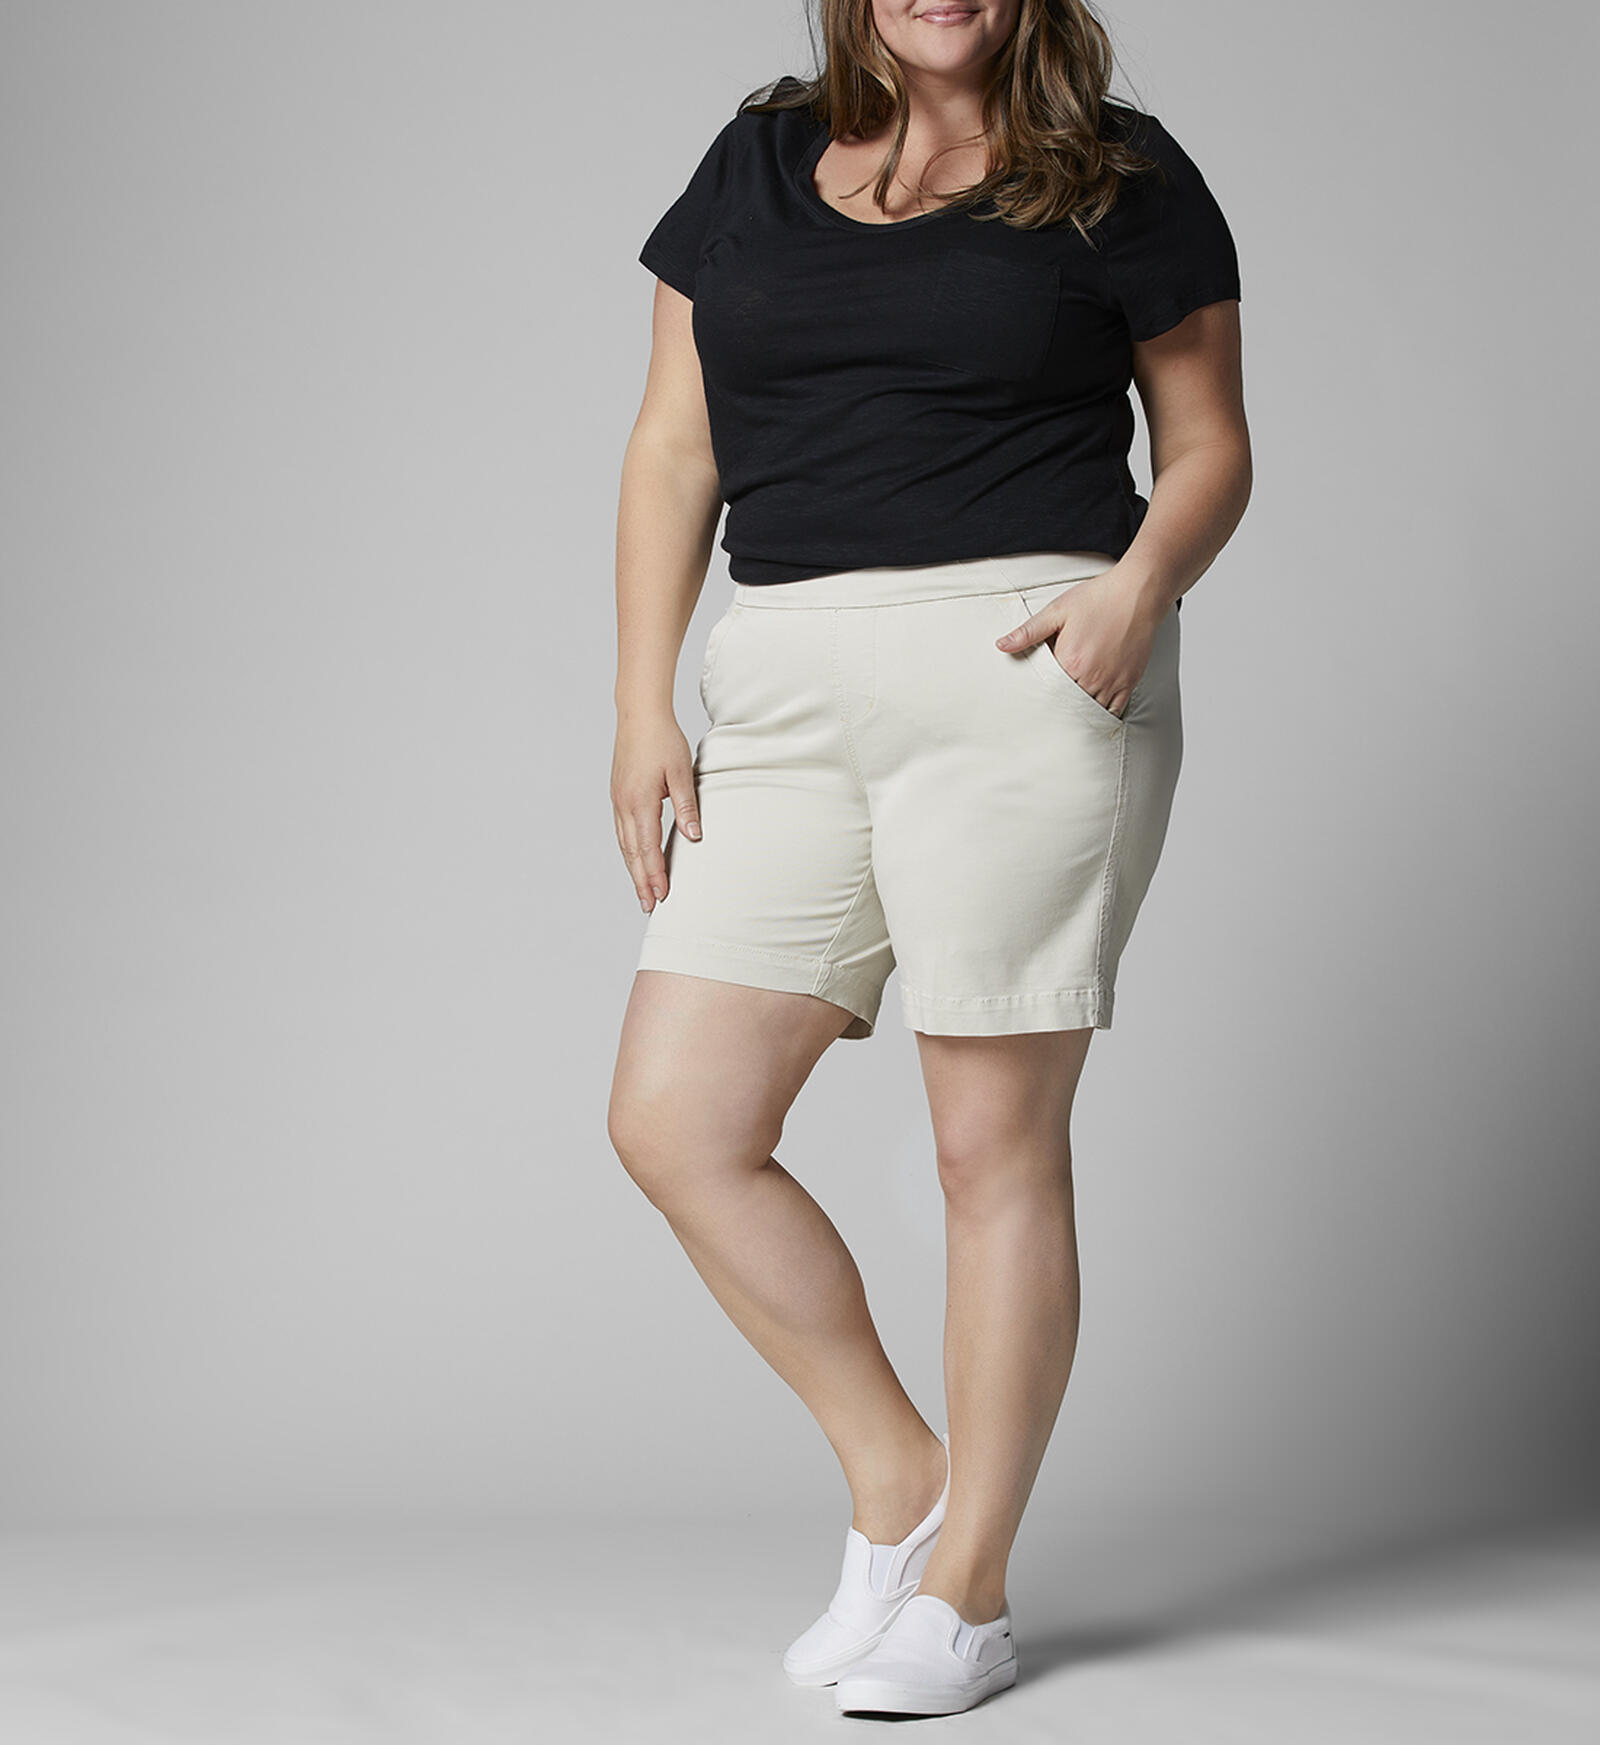 Ricki's Canada Offers: Get 40% Off All Capris, Crops & Shorts Plus